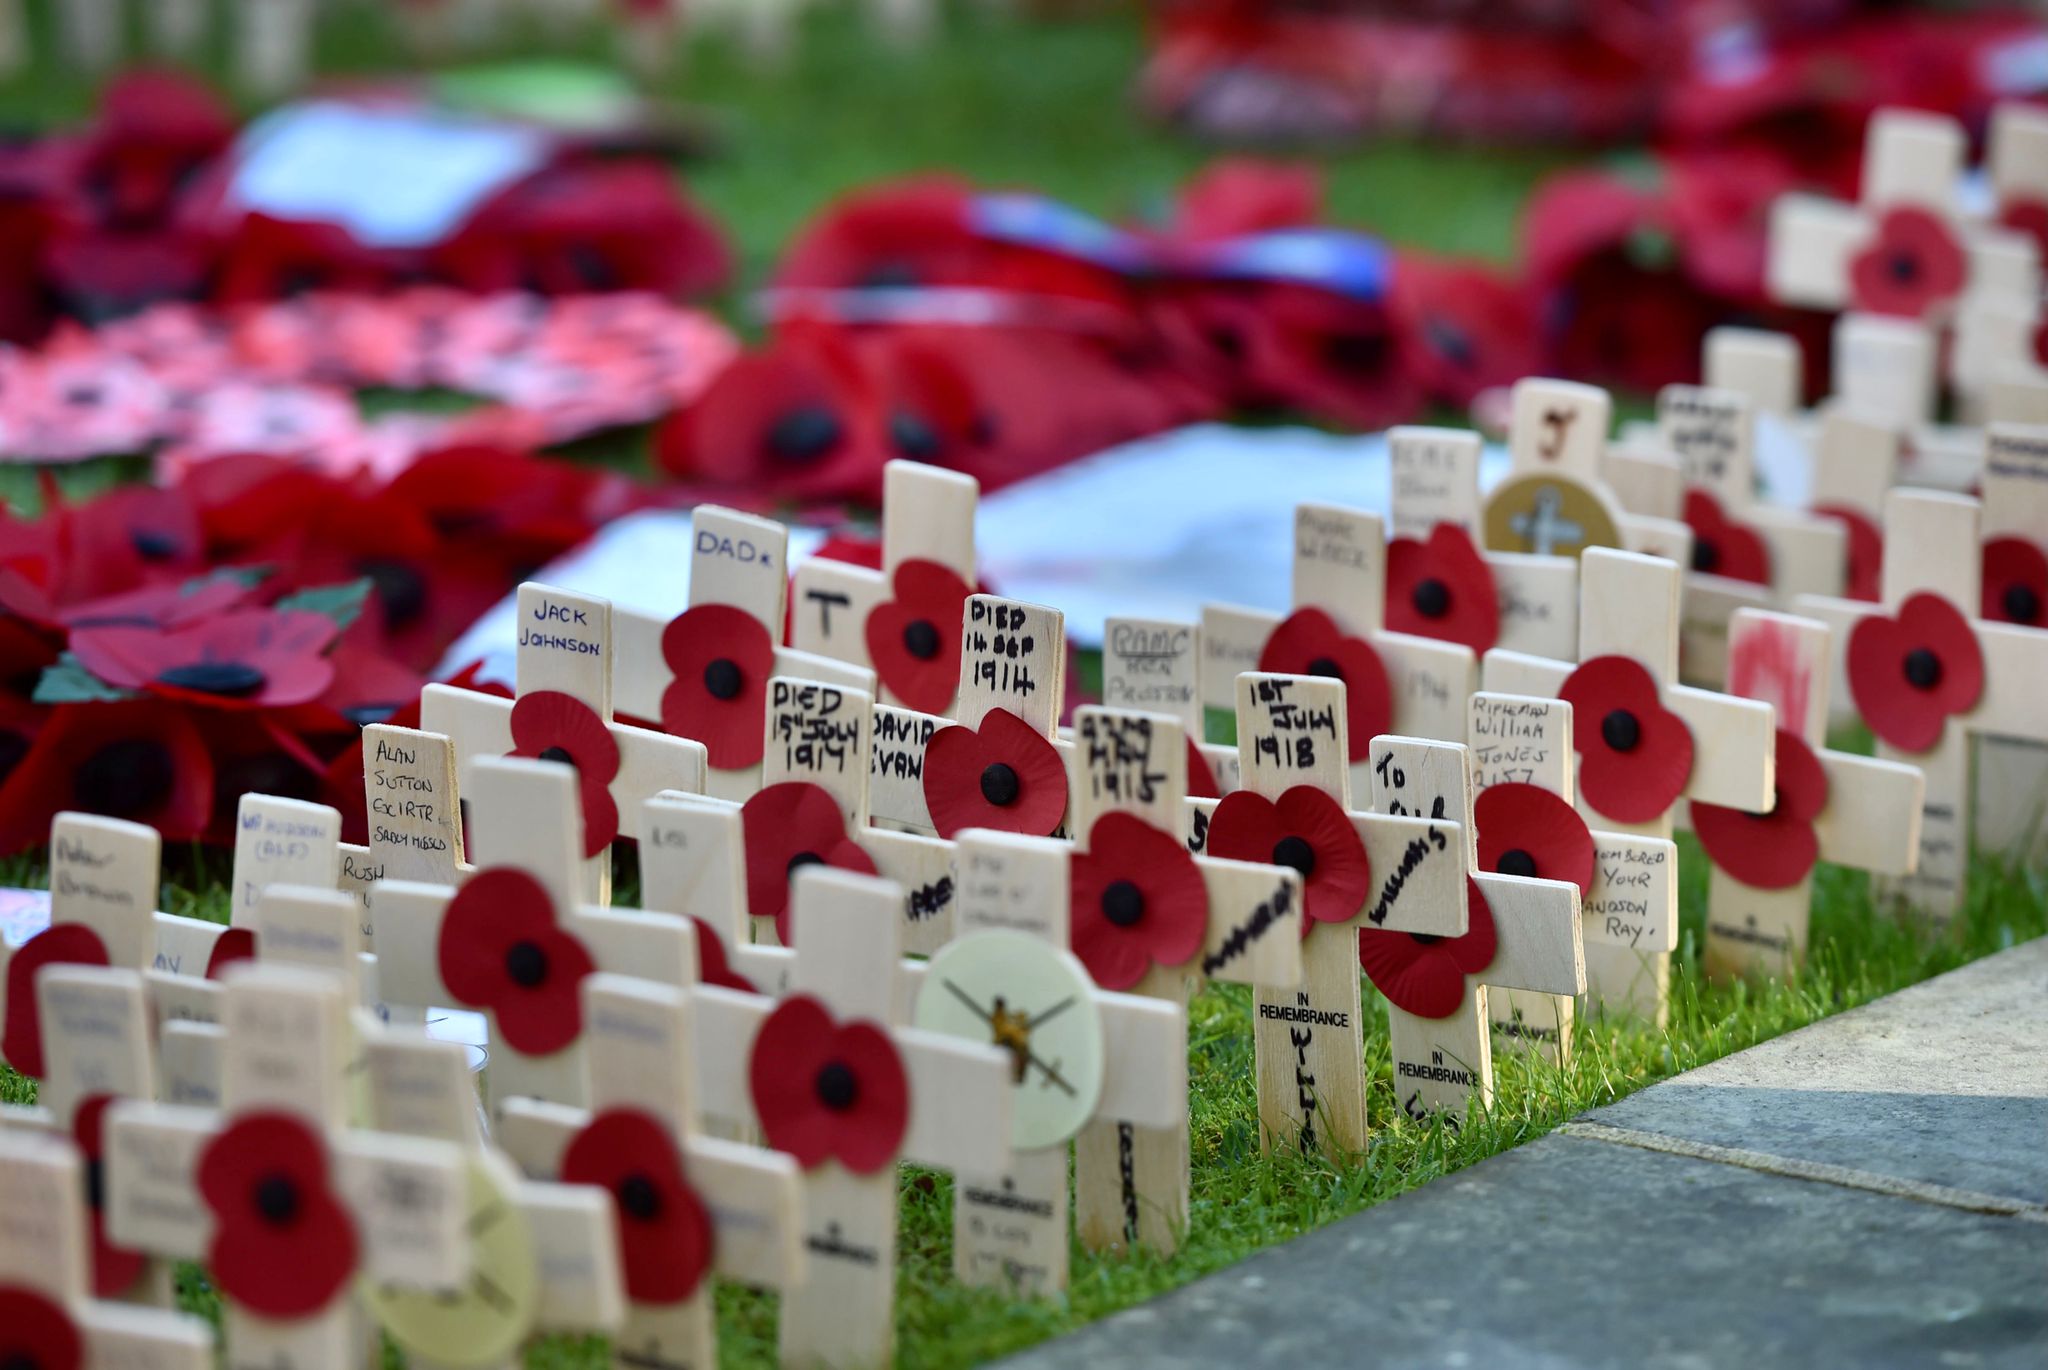 Poppy crosses planted at St Helens Cenotaph